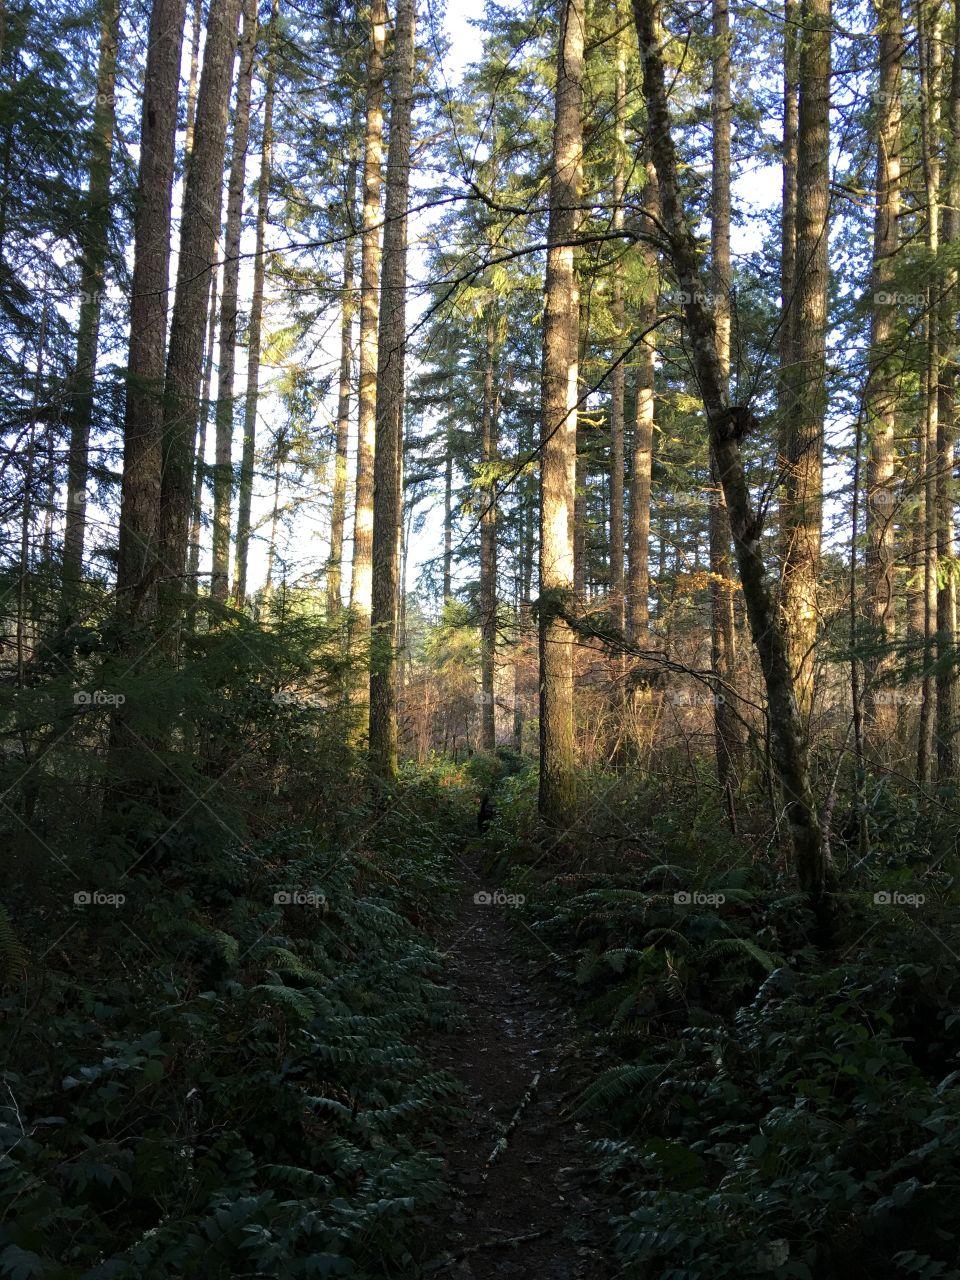 Sun highlights the trees along a narrow path surrounded by ferns. 